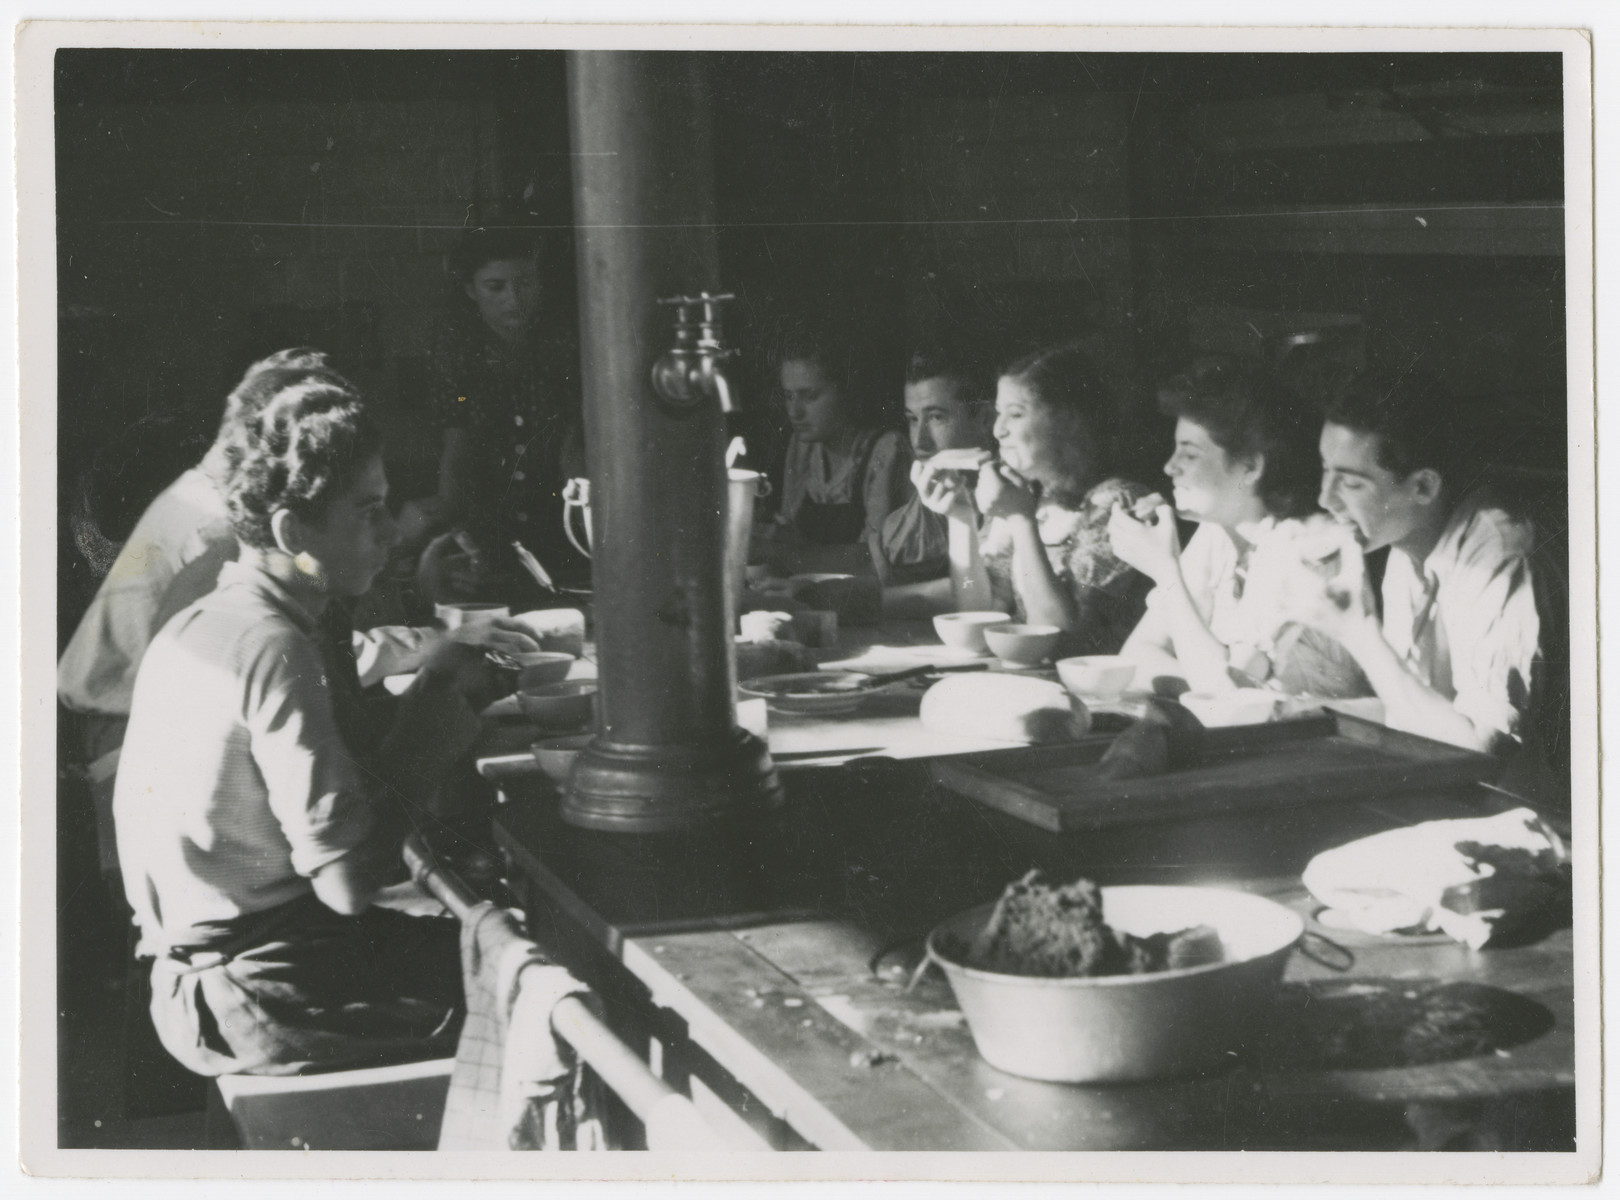 Zionist youth, some who came to Switzerland on the Kasztner transport, share a meal in the dining room of a kibbutz hachshara near Bern.

Eva Weinberger is pictured sixth from the right.